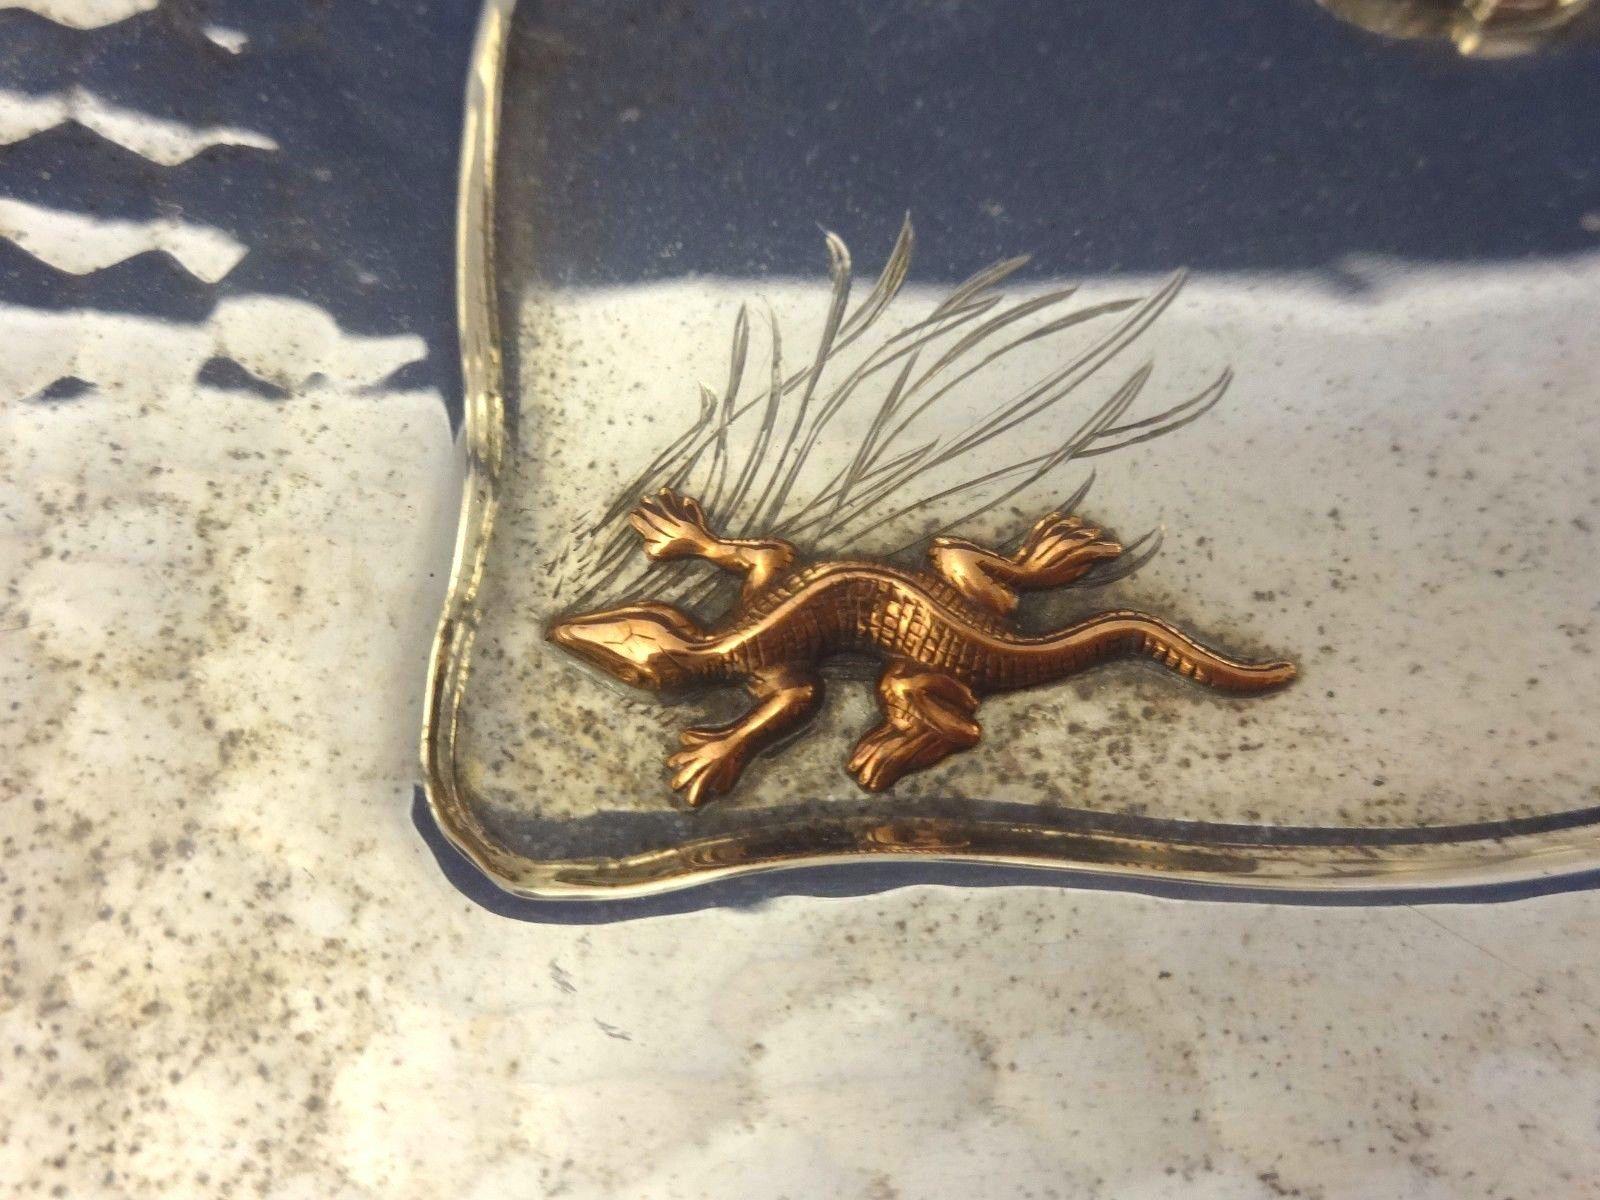 Mixed metals by Whiting Fabulous sterling square bowl made by Whiting. It has an applied gold bird over etched clouds and an applied copper lizard/salamander over etched grasses. The interior of the bowl has a hammered finish. It's marked with